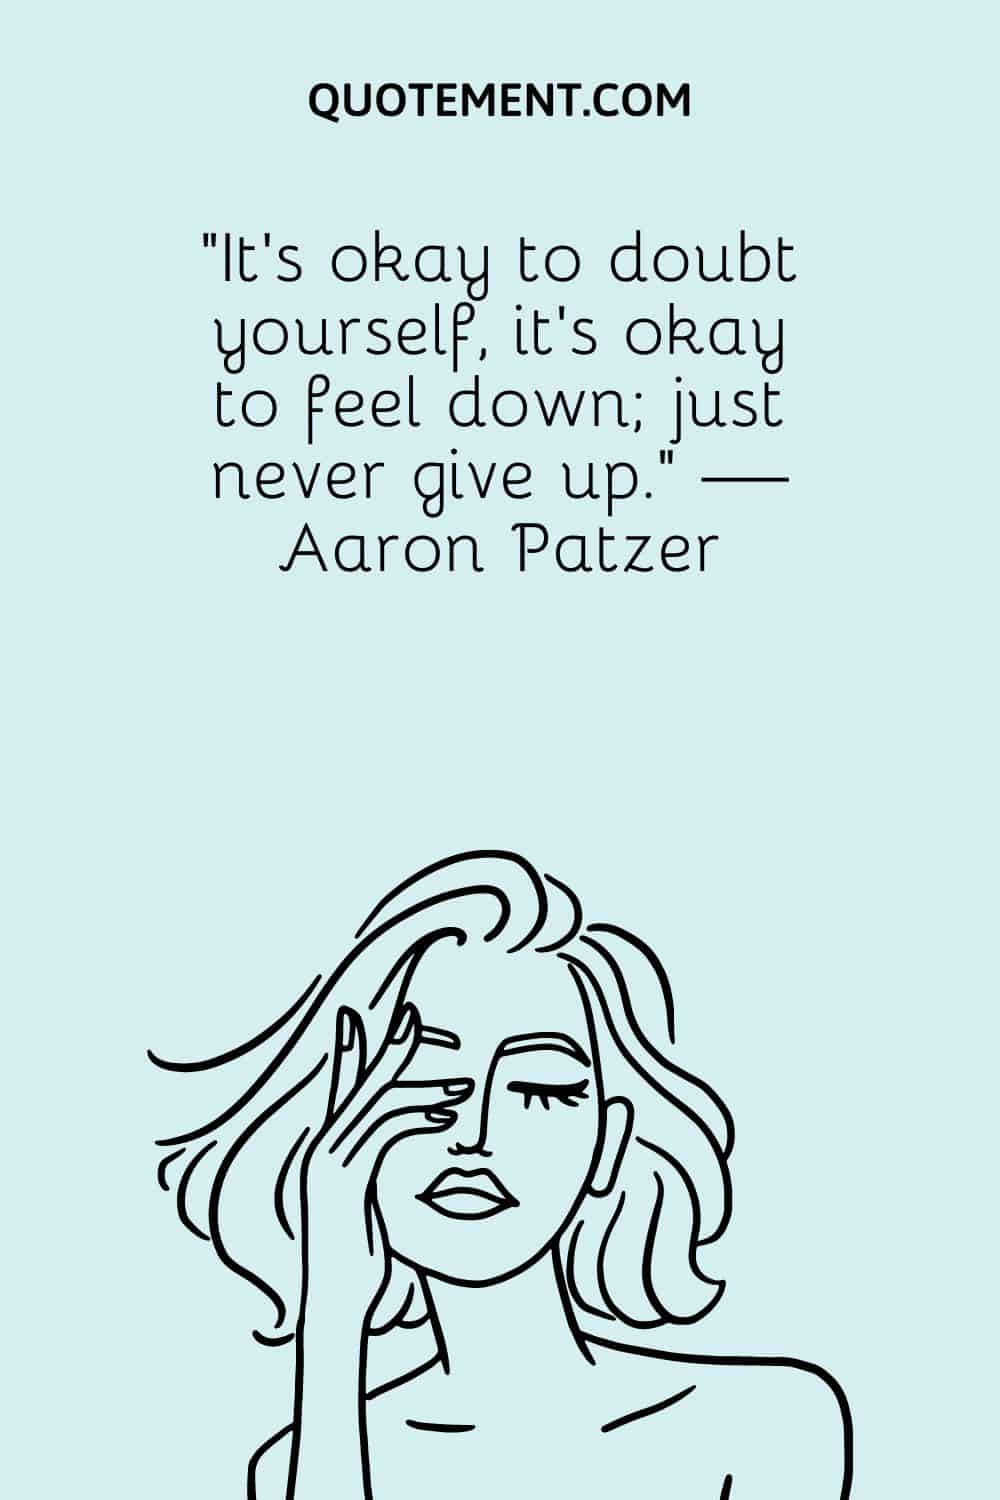 It’s okay to doubt yourself, it’s okay to feel down; just never give up